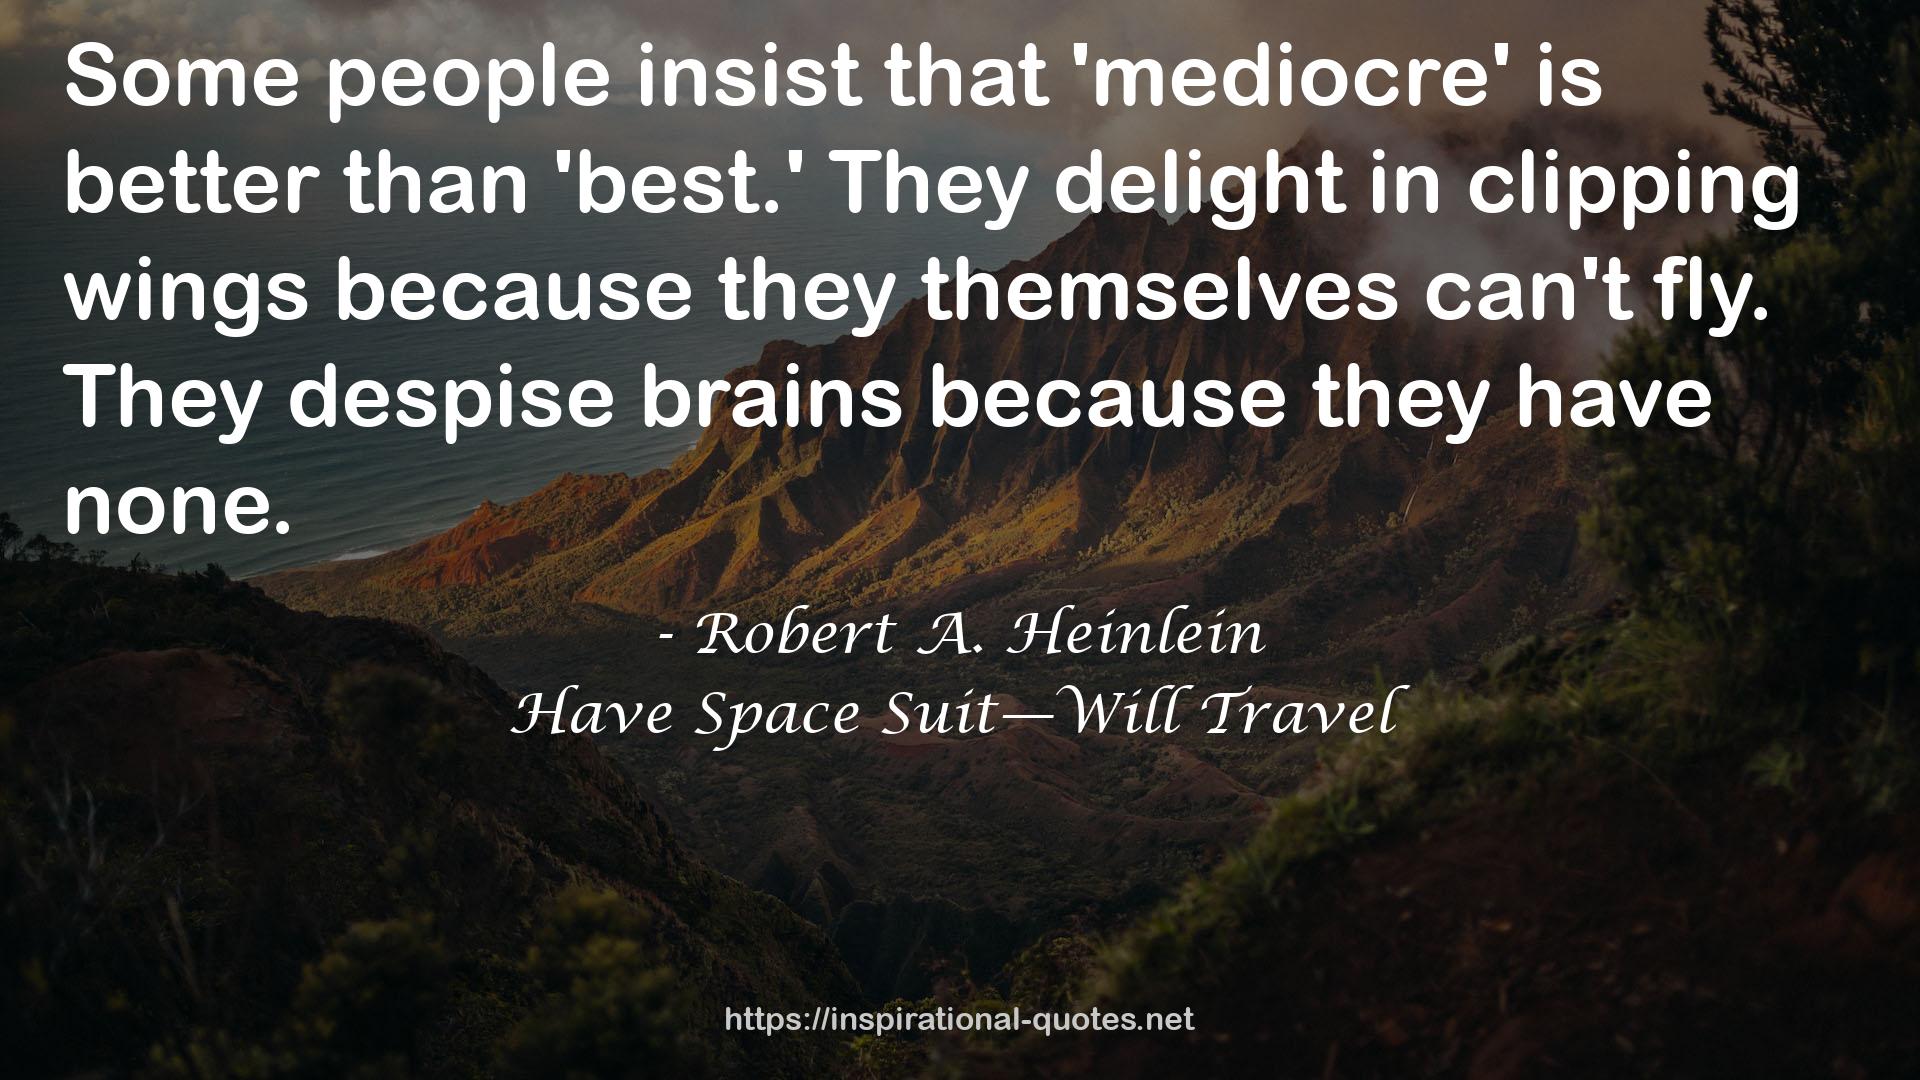 Have Space Suit—Will Travel QUOTES